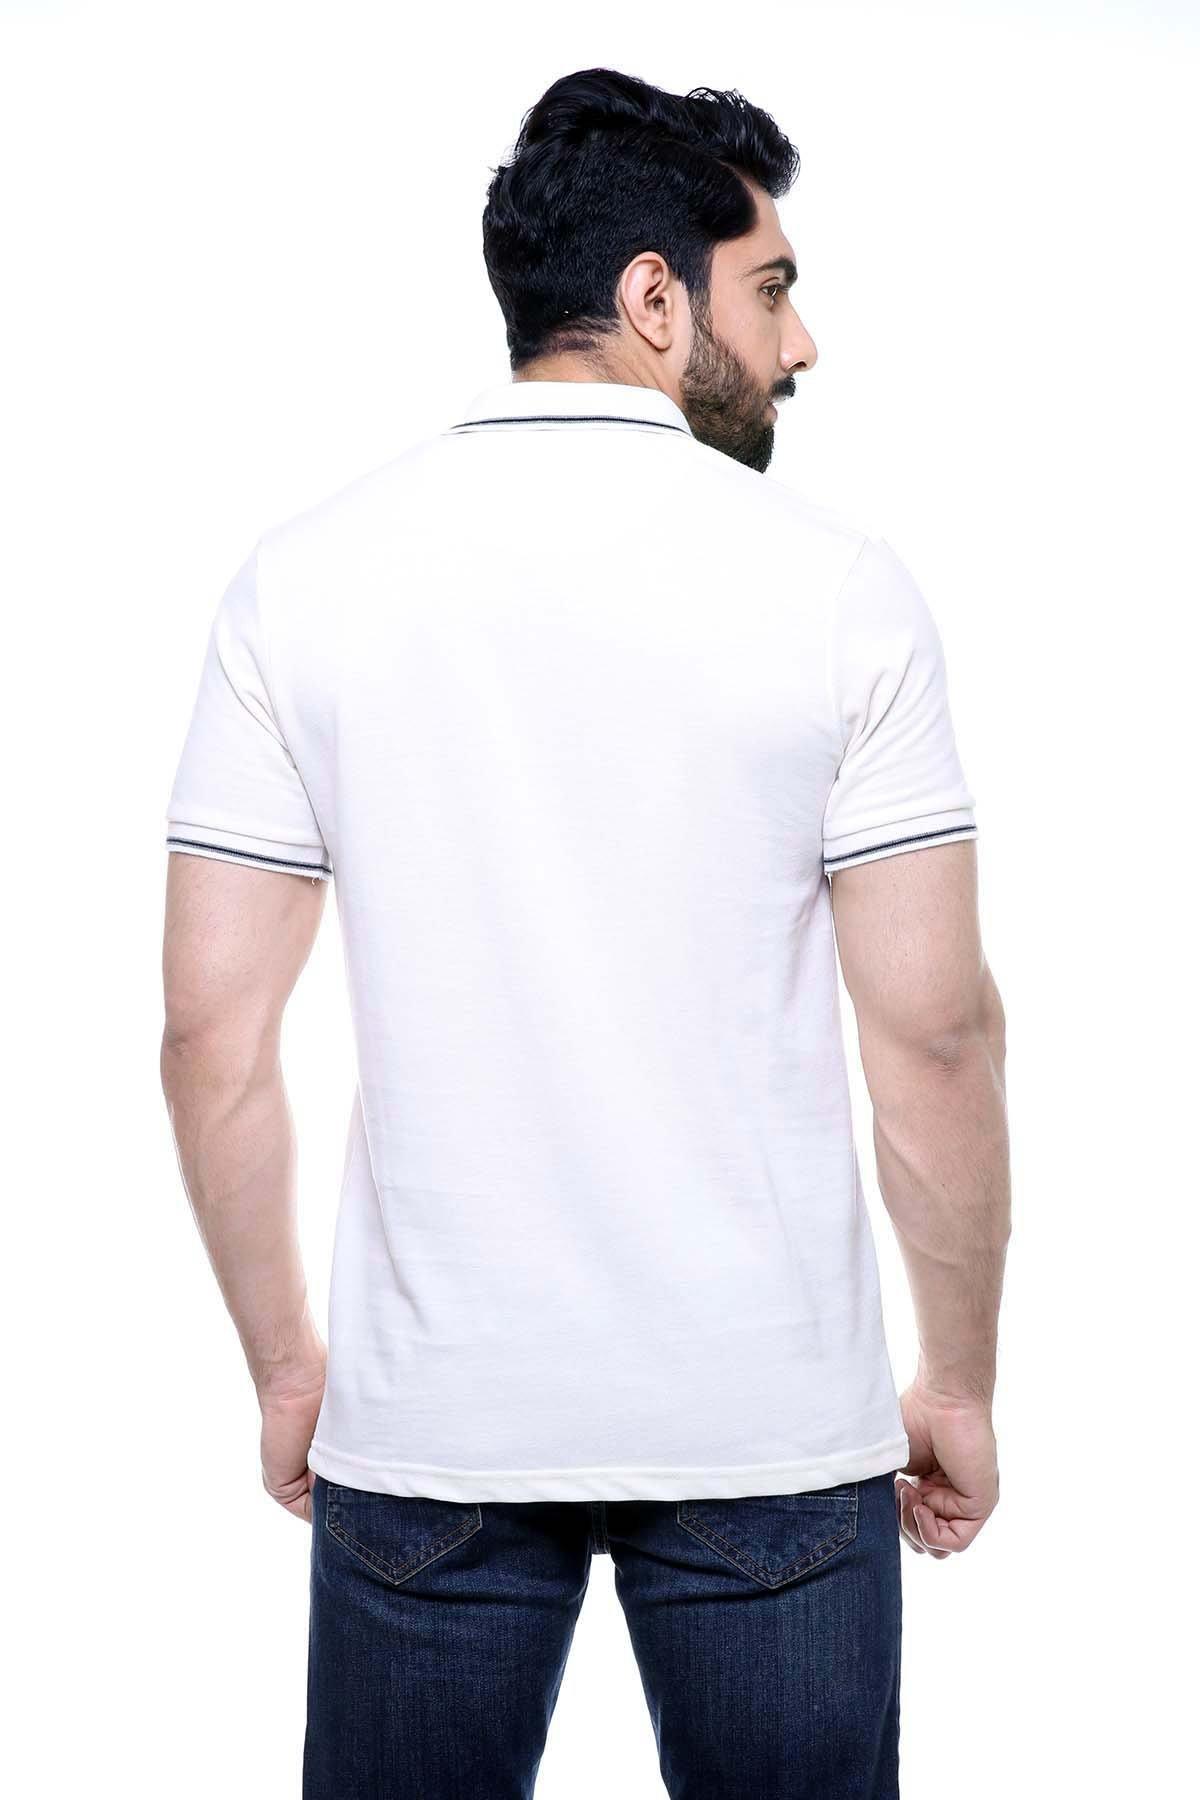 T SHIRT POLO off White at Charcoal Clothing